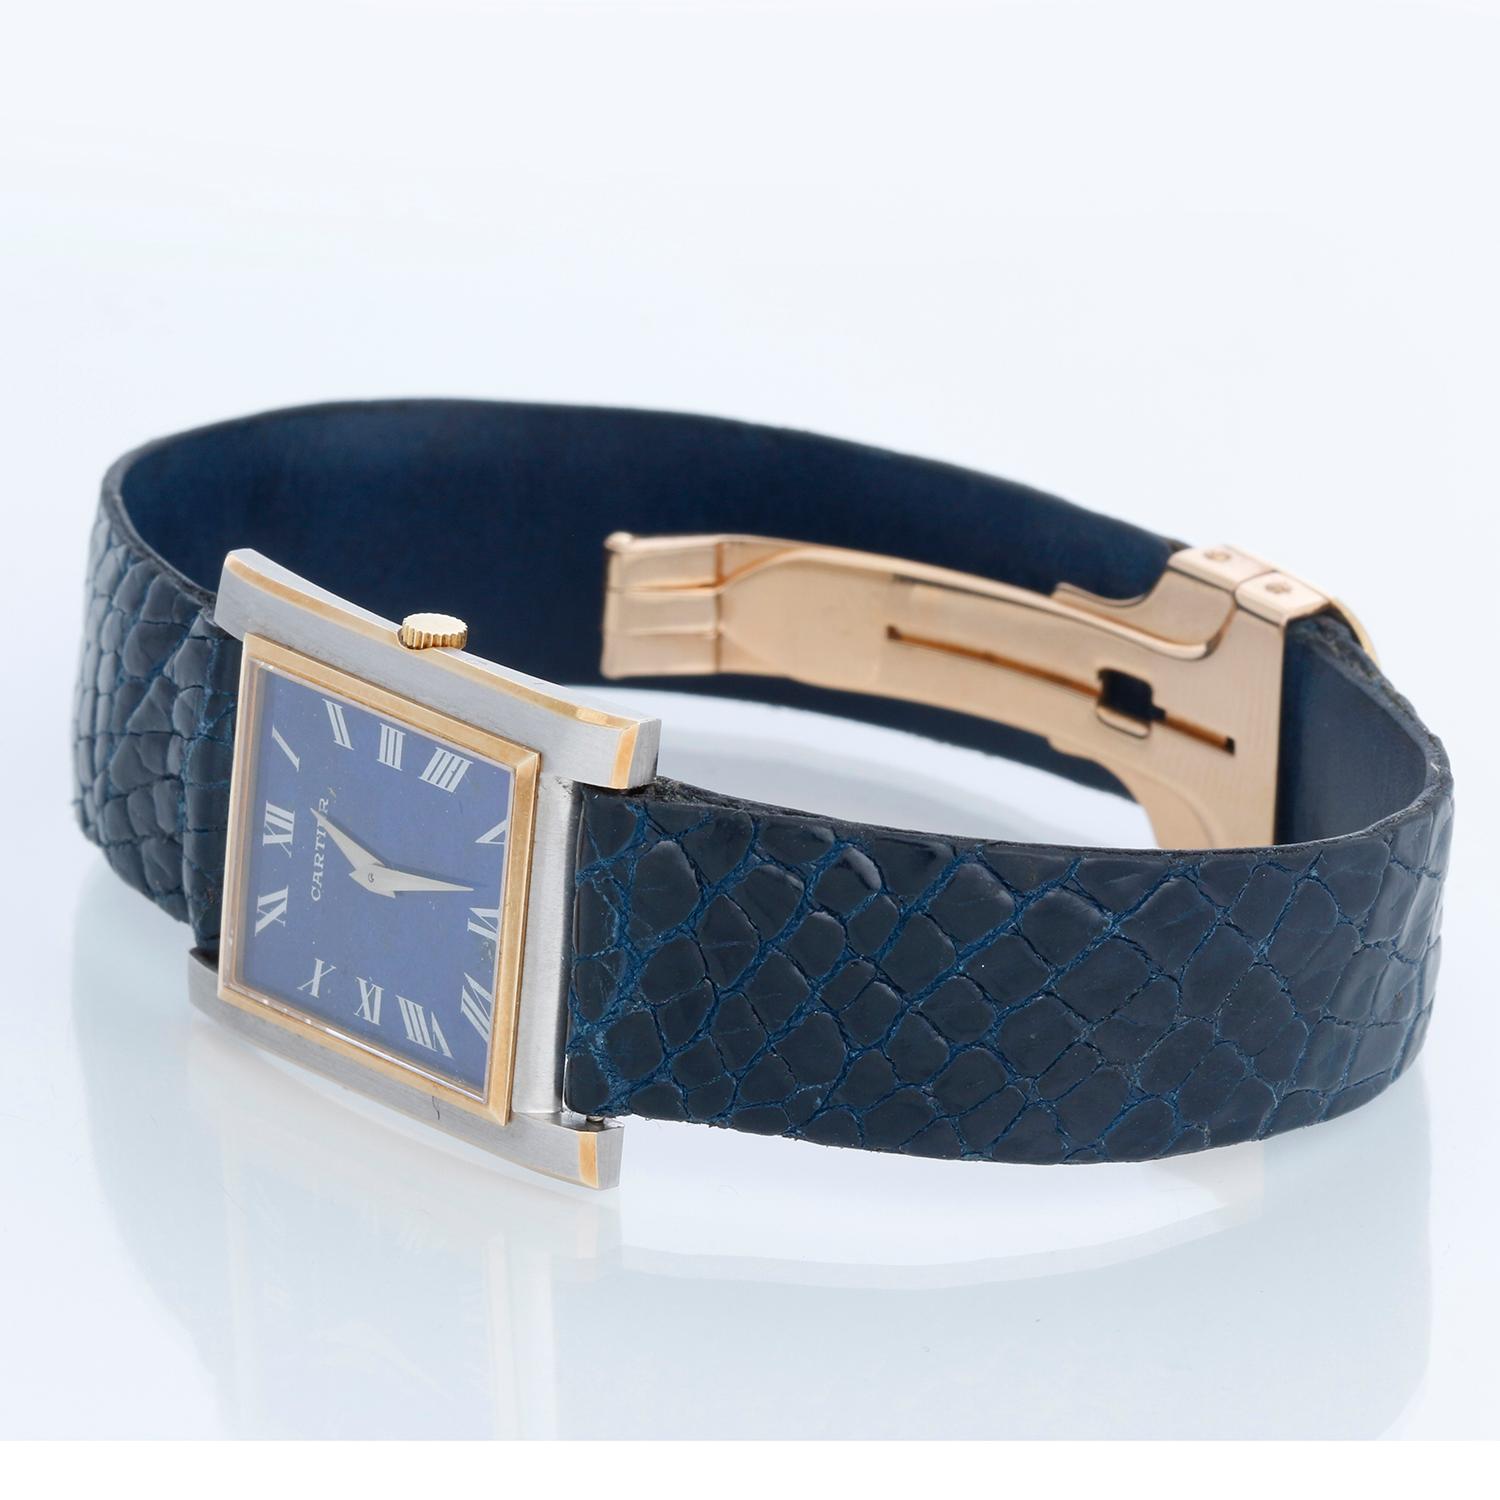 Vintage Ladies Cartier Tank Lapis Lazuli Watch - Manual winding. 18k White & Yellow gold case ( 24 mm x 30 mm ). Lapis Lazuli dial. Blue strap  with 18K Yellow Gold Cartier deployant clasp. Pre-owned - vintage ca. 1970's.